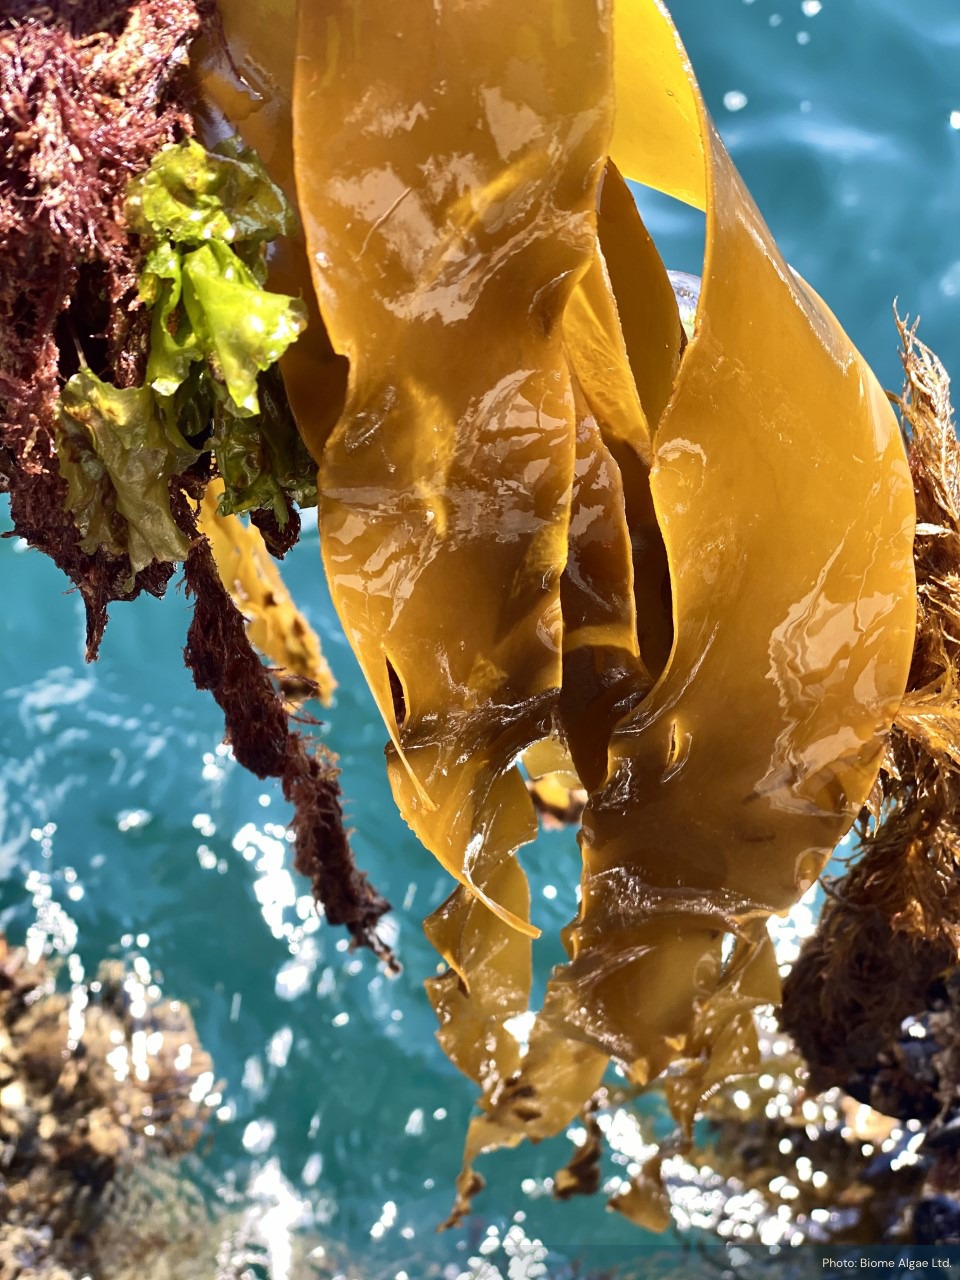 New coalition aims to accelerate growth in the European seaweed industry and contribute towards post-COVID-19 green recovery